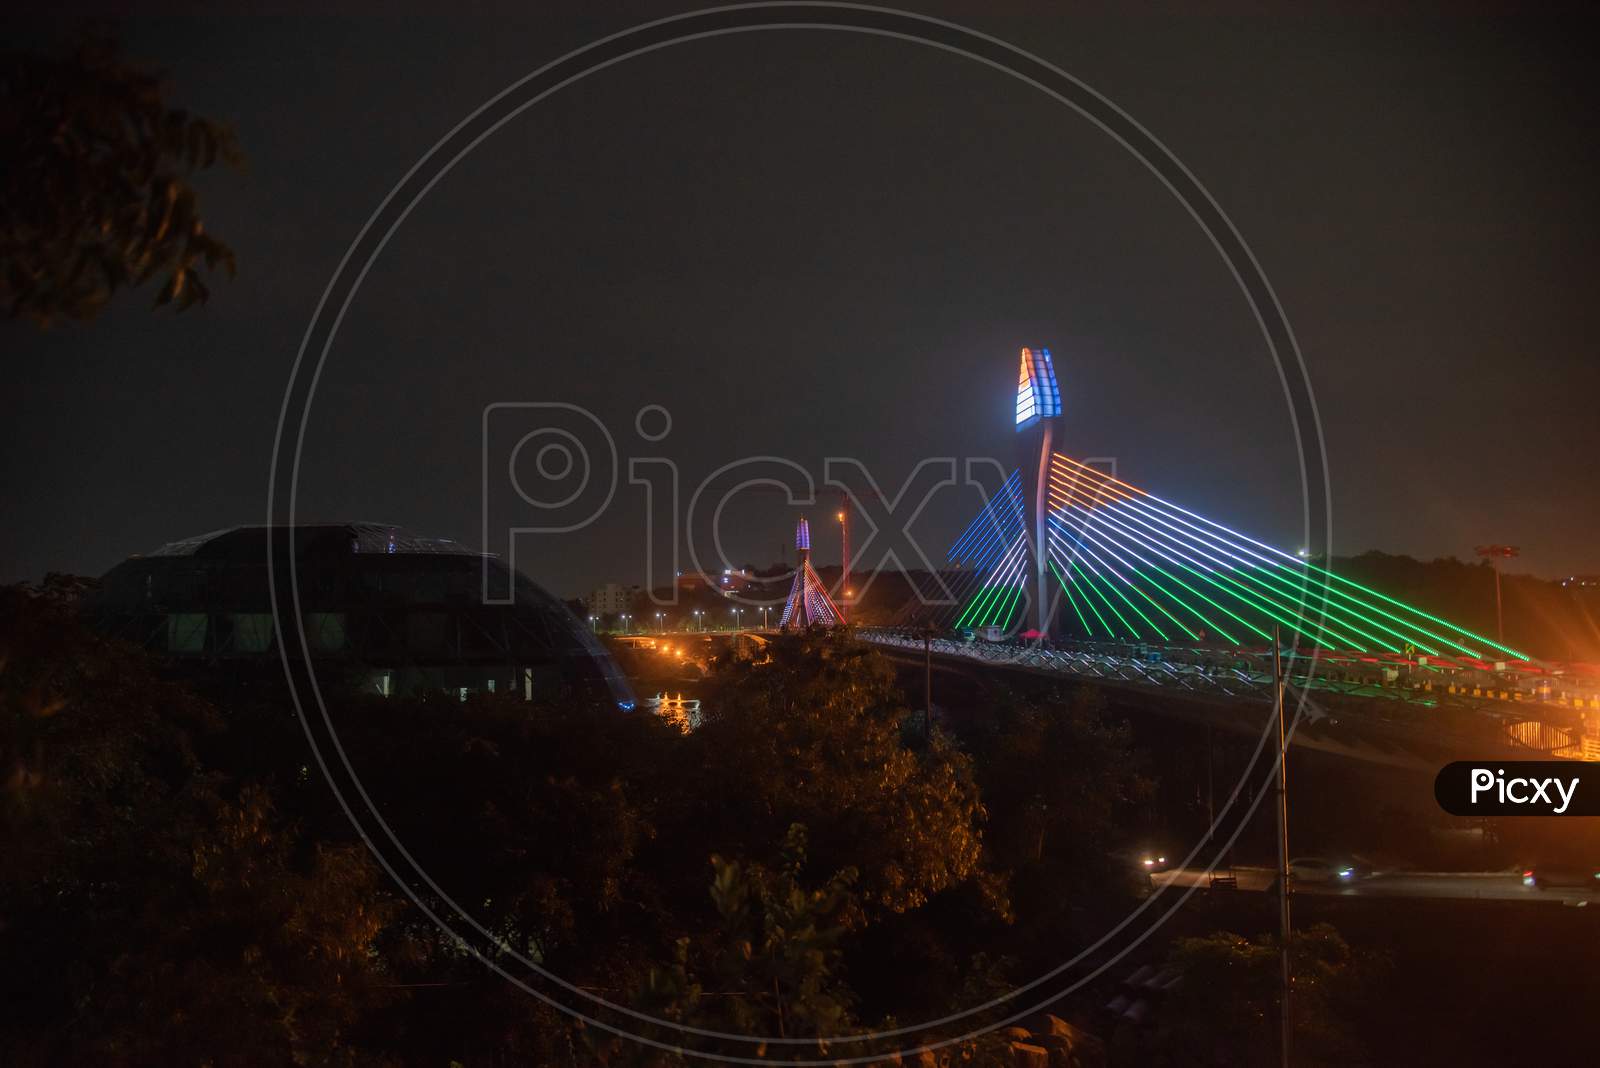 Durgam Cheruvu Cable Bridge getting final touches as the bridge is set to be open for Public use in a few days, August 14, 2020,Hyderabad.